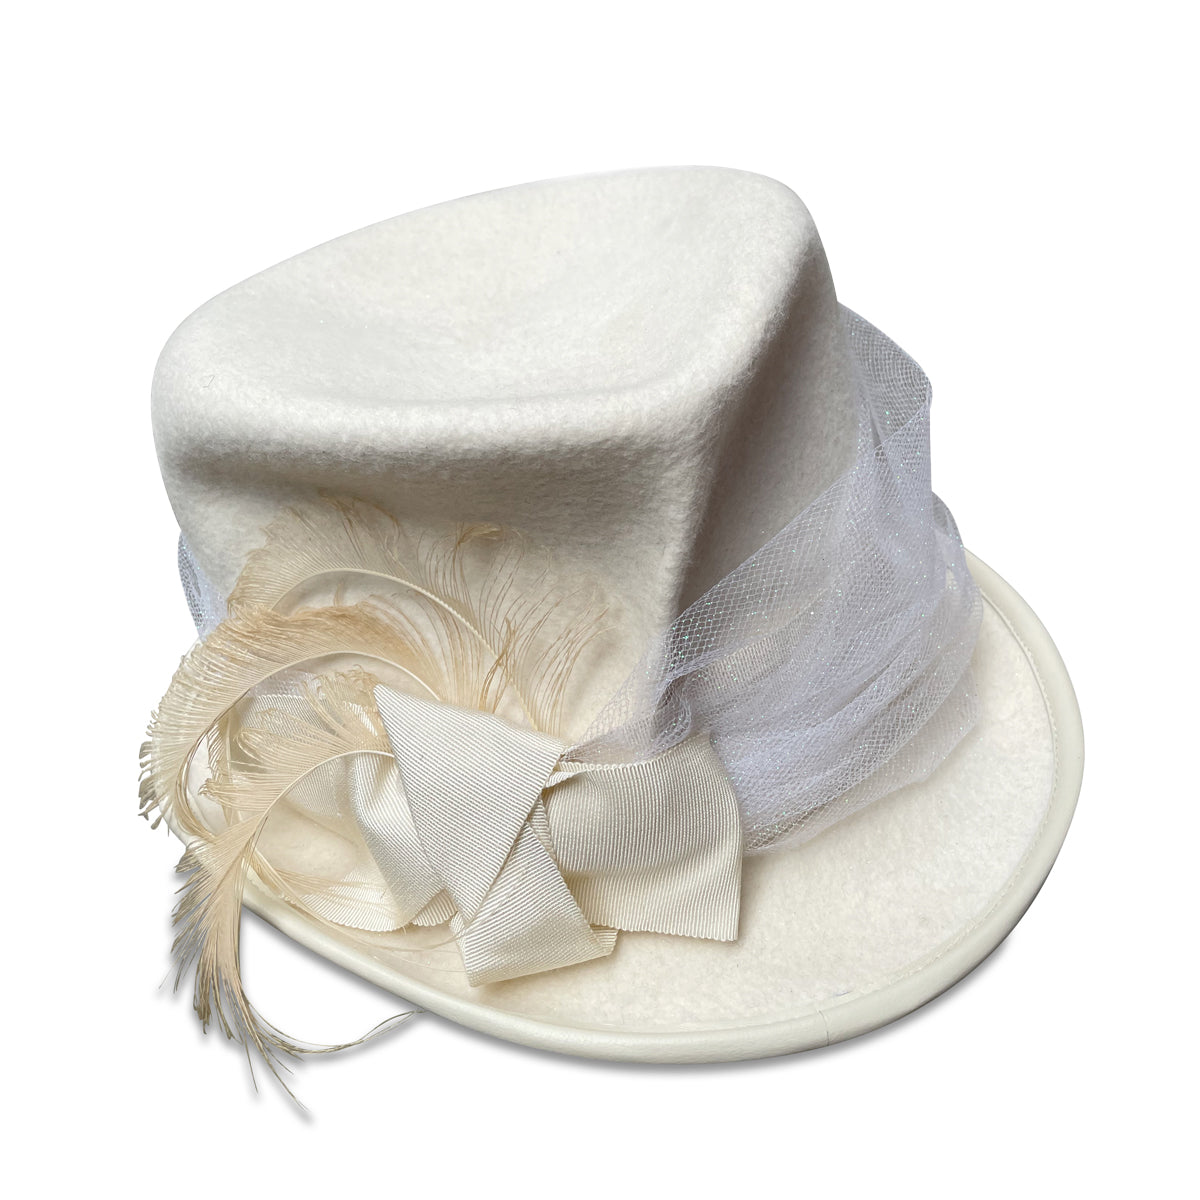 Lilith - Victorian-inspired white top hat made in NYC